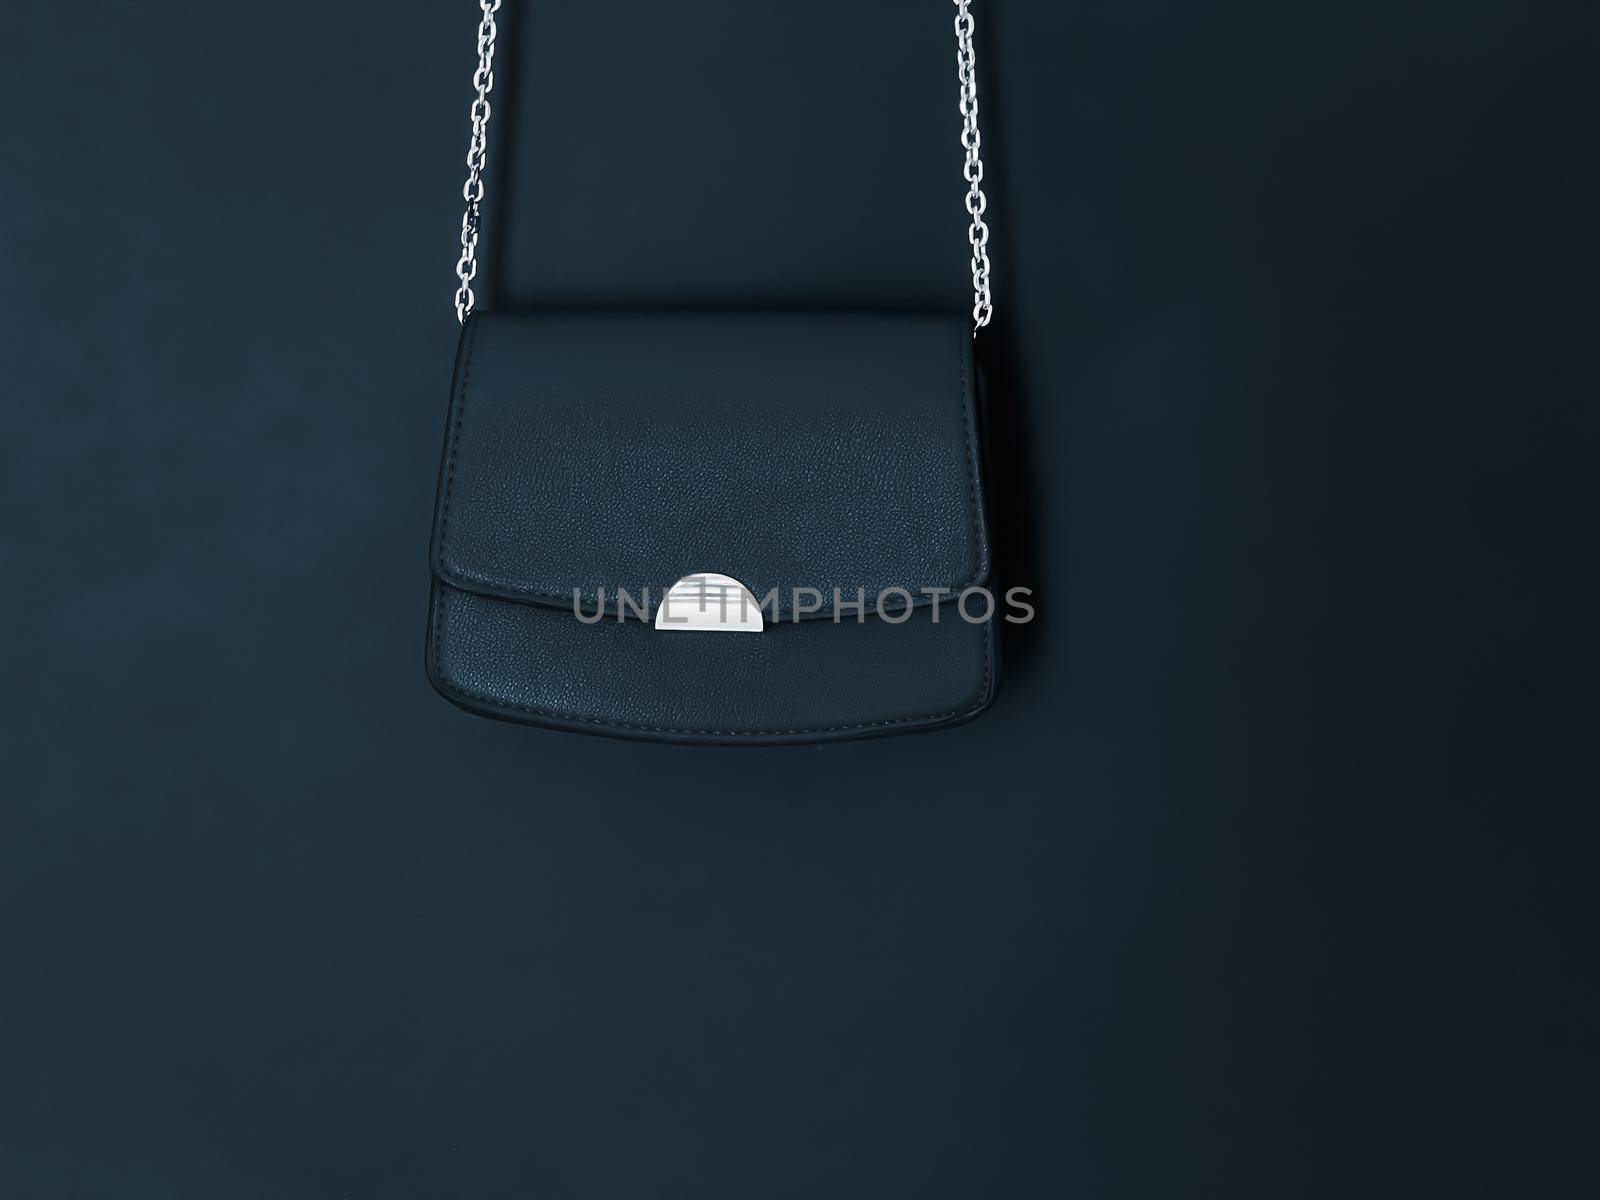 Black fashionable leather purse with silver details as designer bag and stylish accessory, female fashion and luxury style handbag collection concept